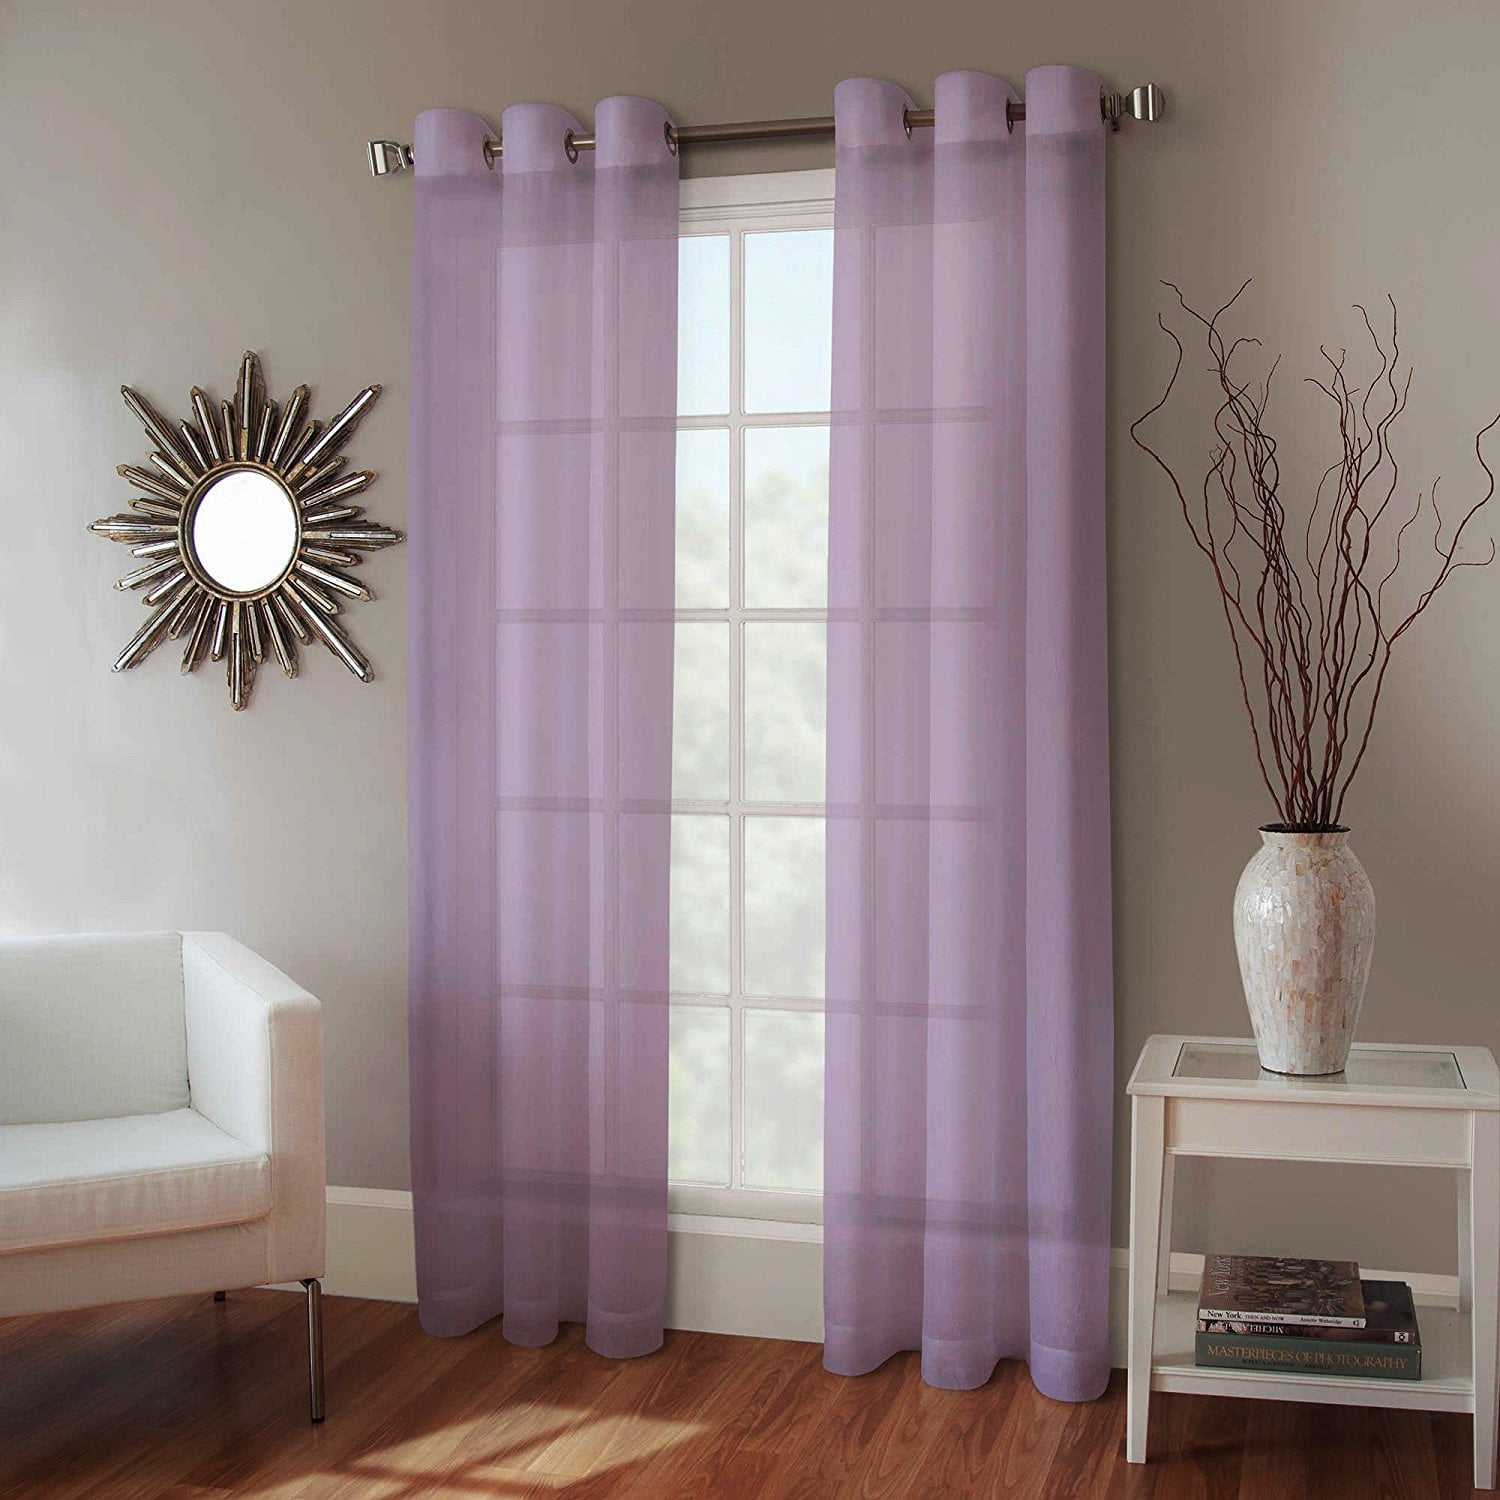 BRAND NEW Whole Home Sheer Panel ONE 59" x 63" PLATINUM VOILE PANEL Lilac 